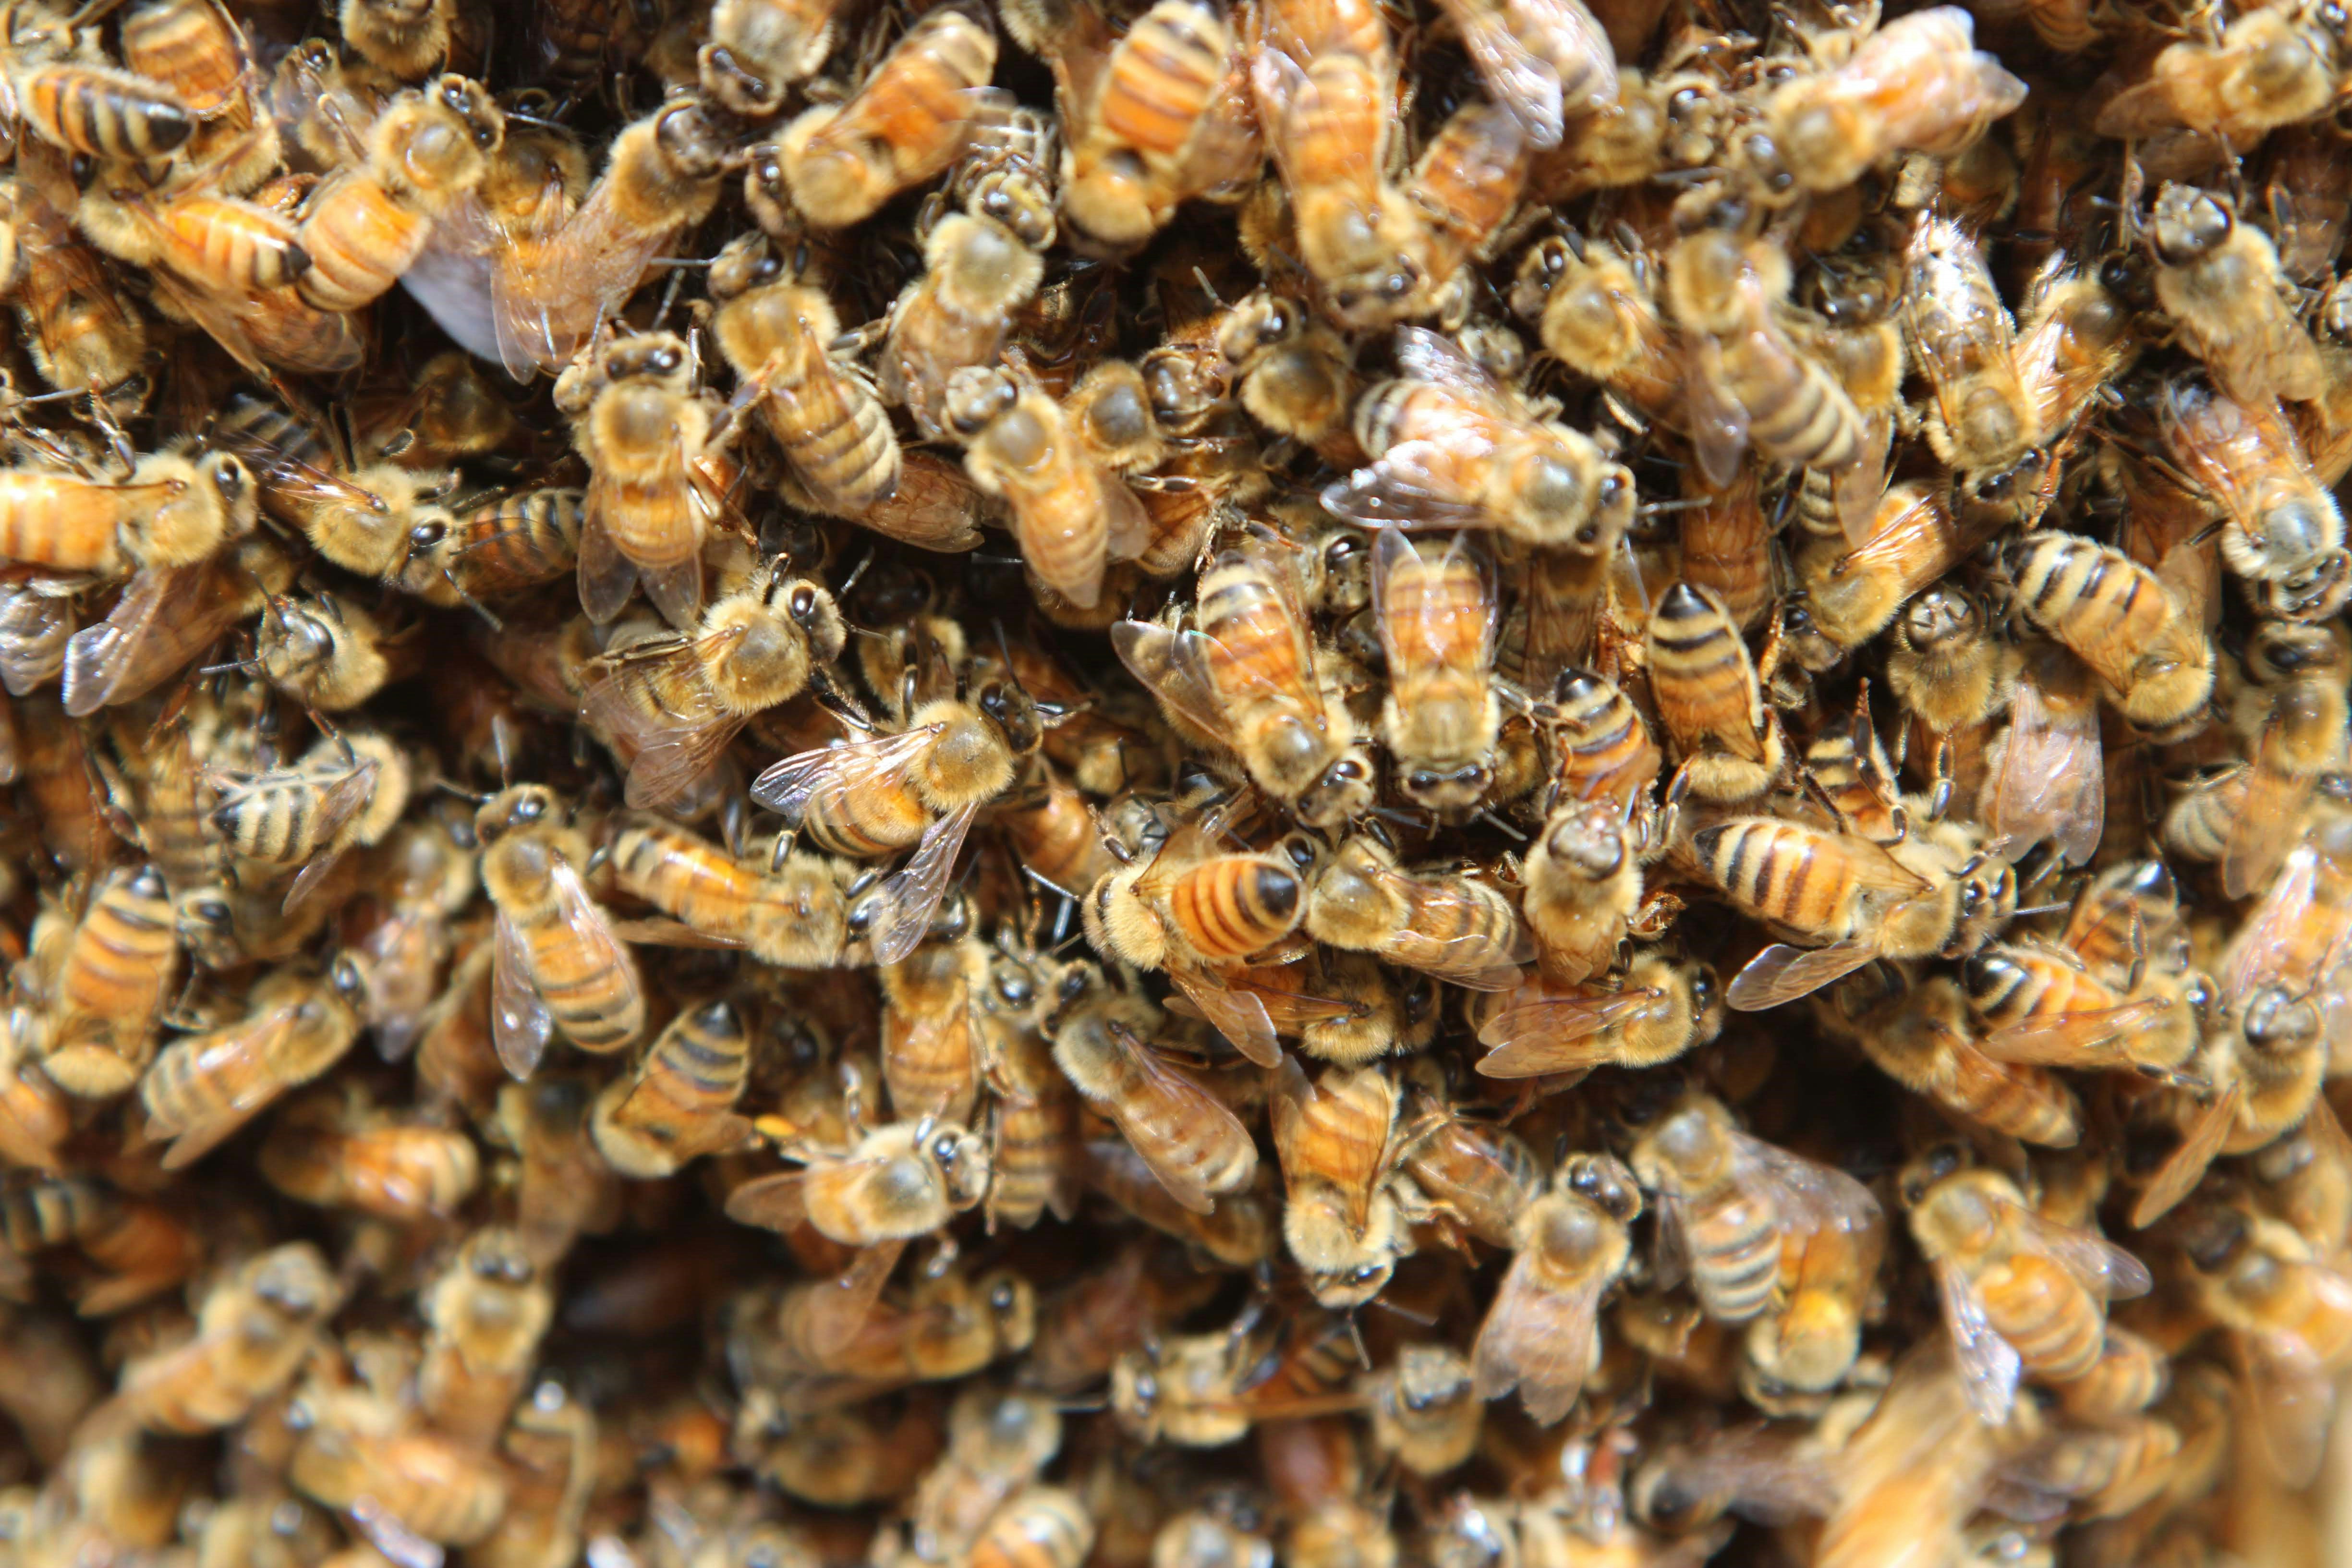 a group of bees on a pile